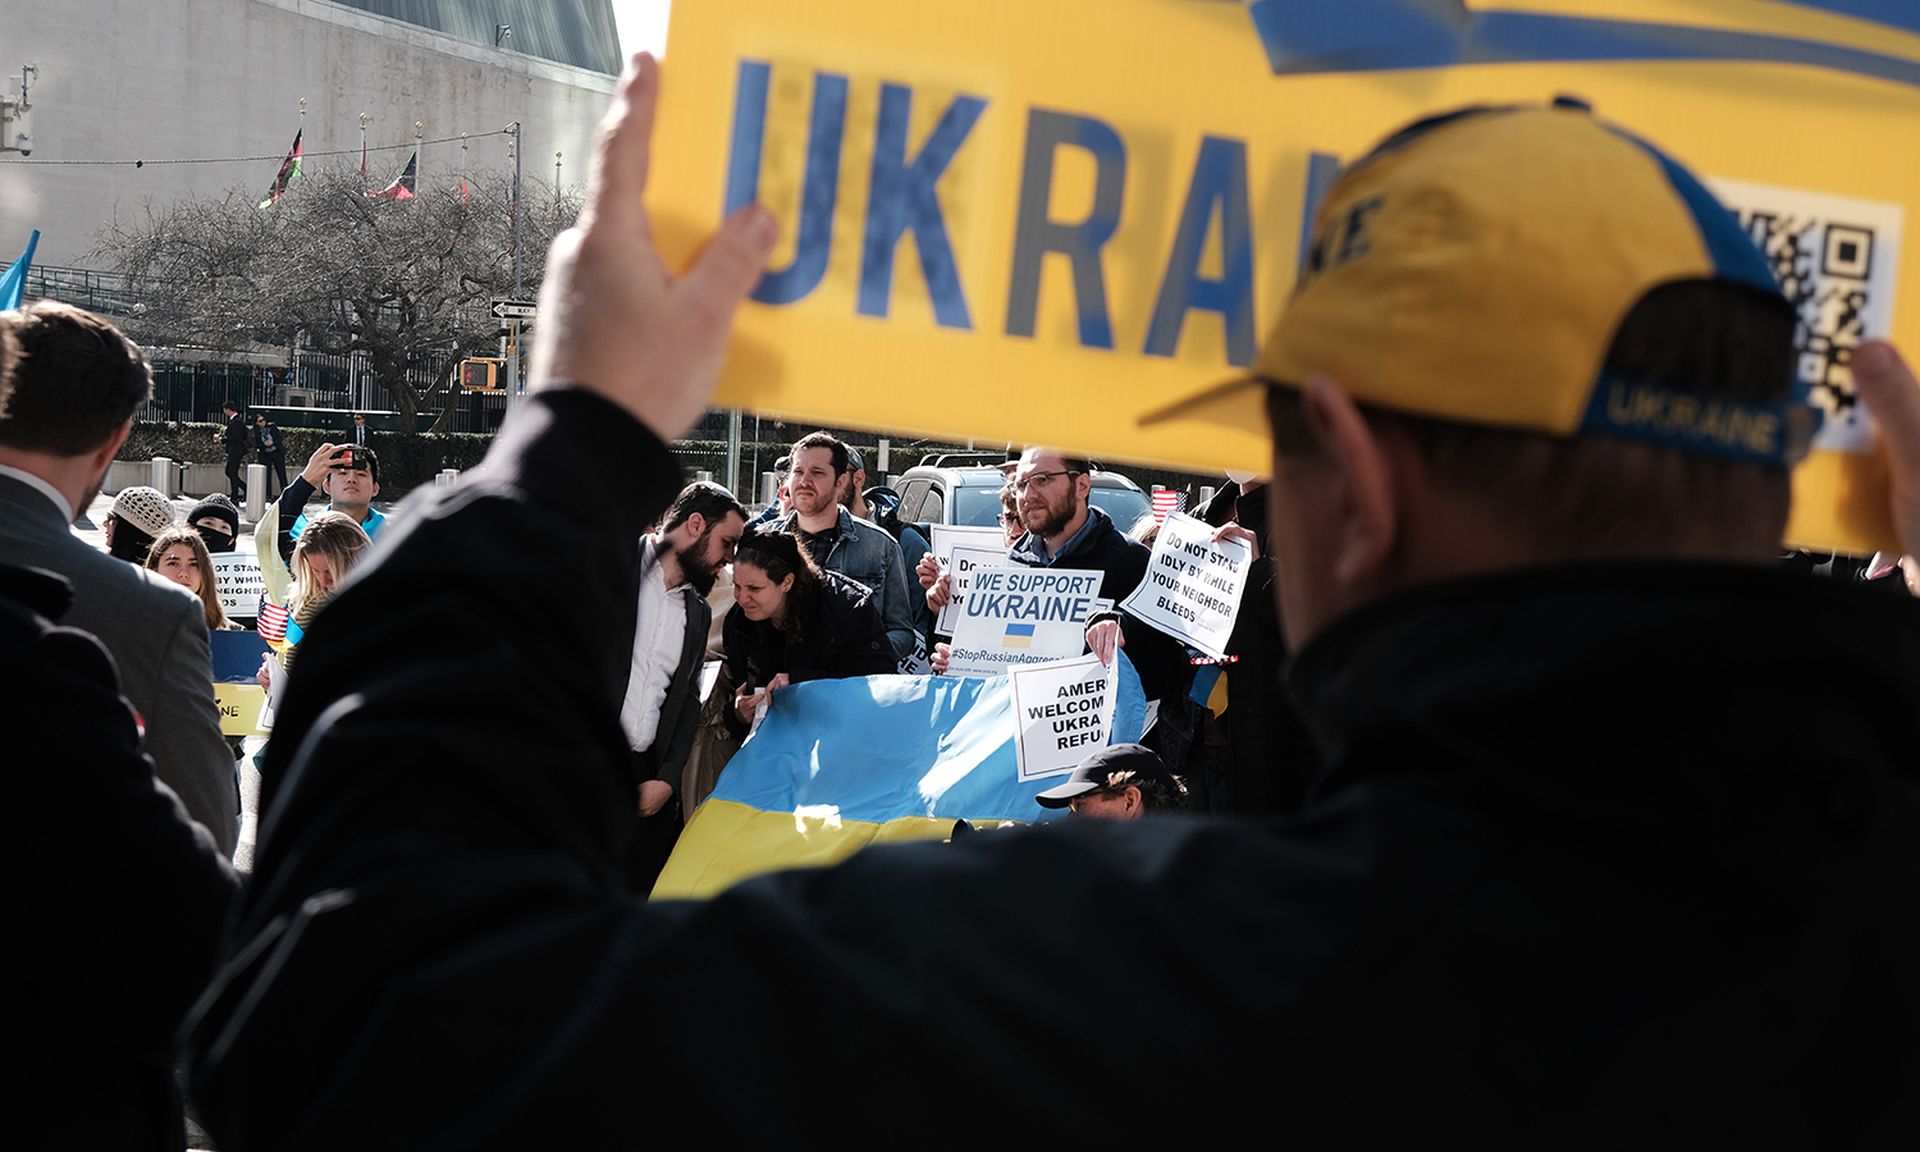 A committee of Ukrainian leaders, rabbis and other religious figures participate in a protest in front of the U.S. Mission to the United Nations on March 16, 2022, in New York City. (Photo by Spencer Platt/Getty Images)